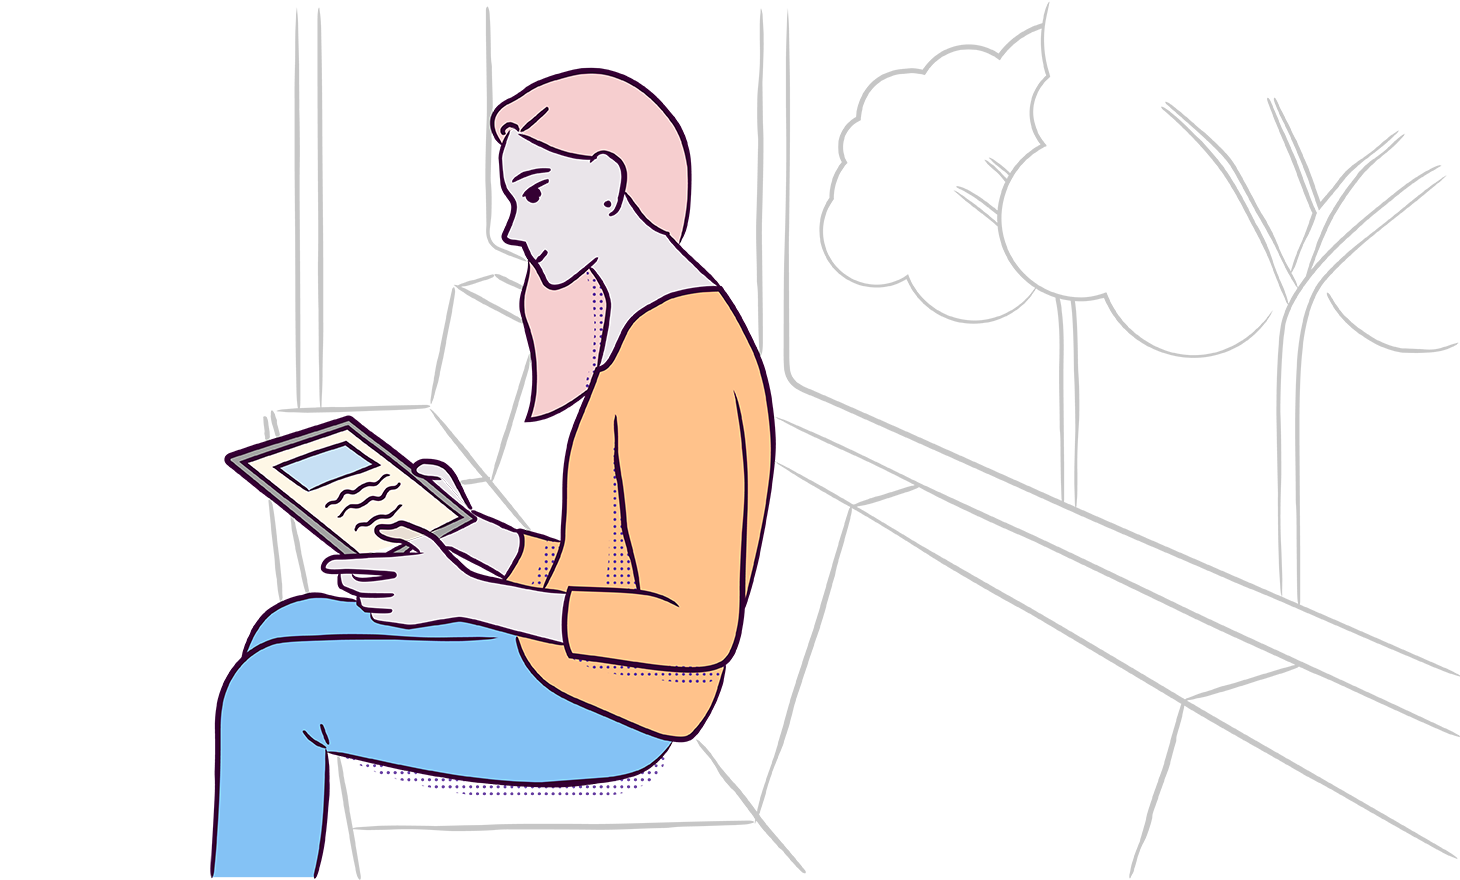 Illustration of a woman reading an article on a train